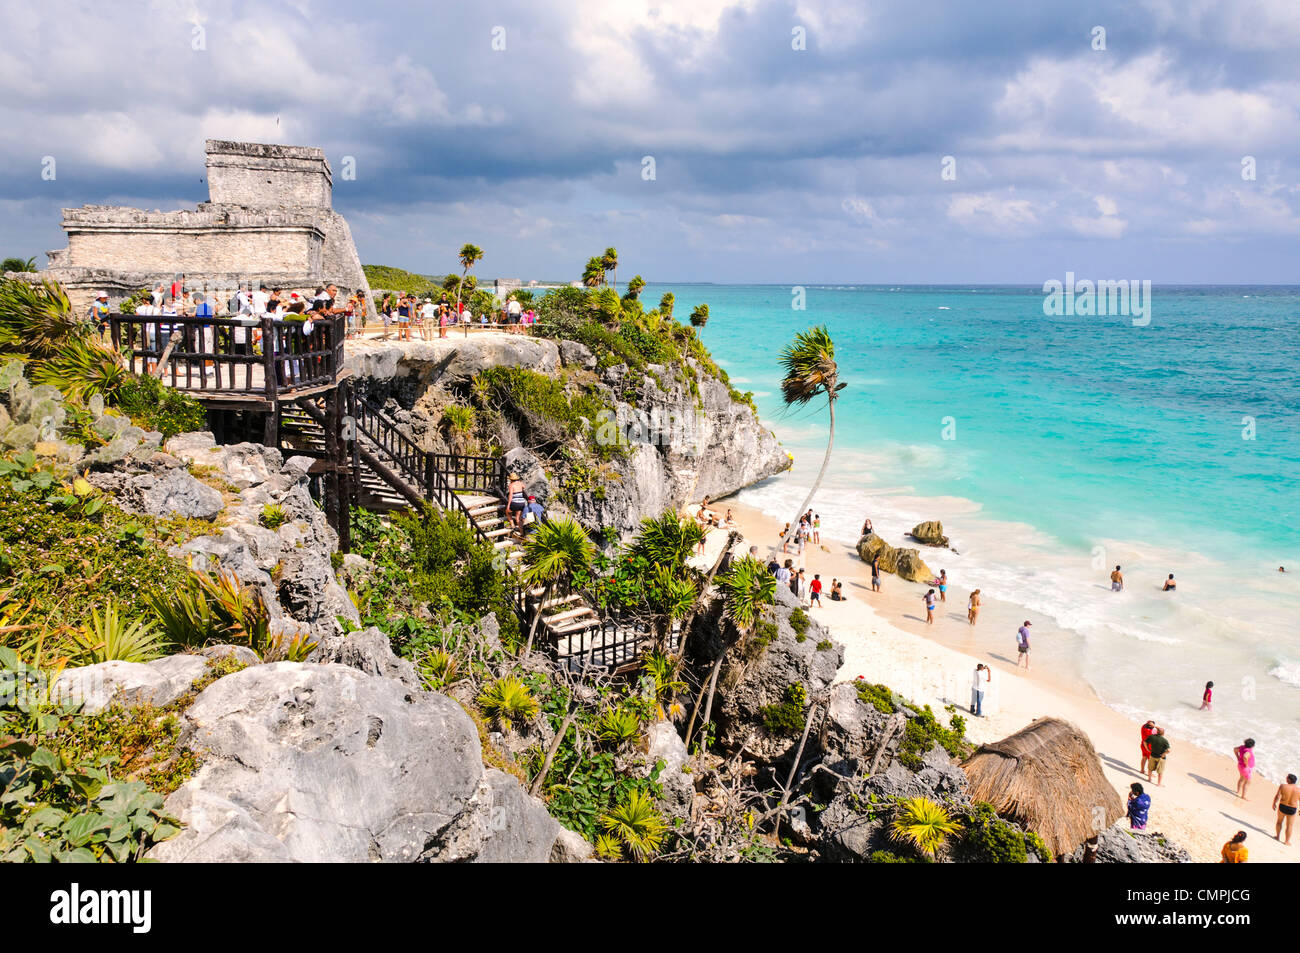 TULUM, Mexico - The ruins of the Maya civilization city at Tulum, on the coast of Mexico's Yucatan Peninsula. At top left is the stone structure known as El Castillo. In the center is a walkway from the ruins down to the white sandy beach below. Stock Photo